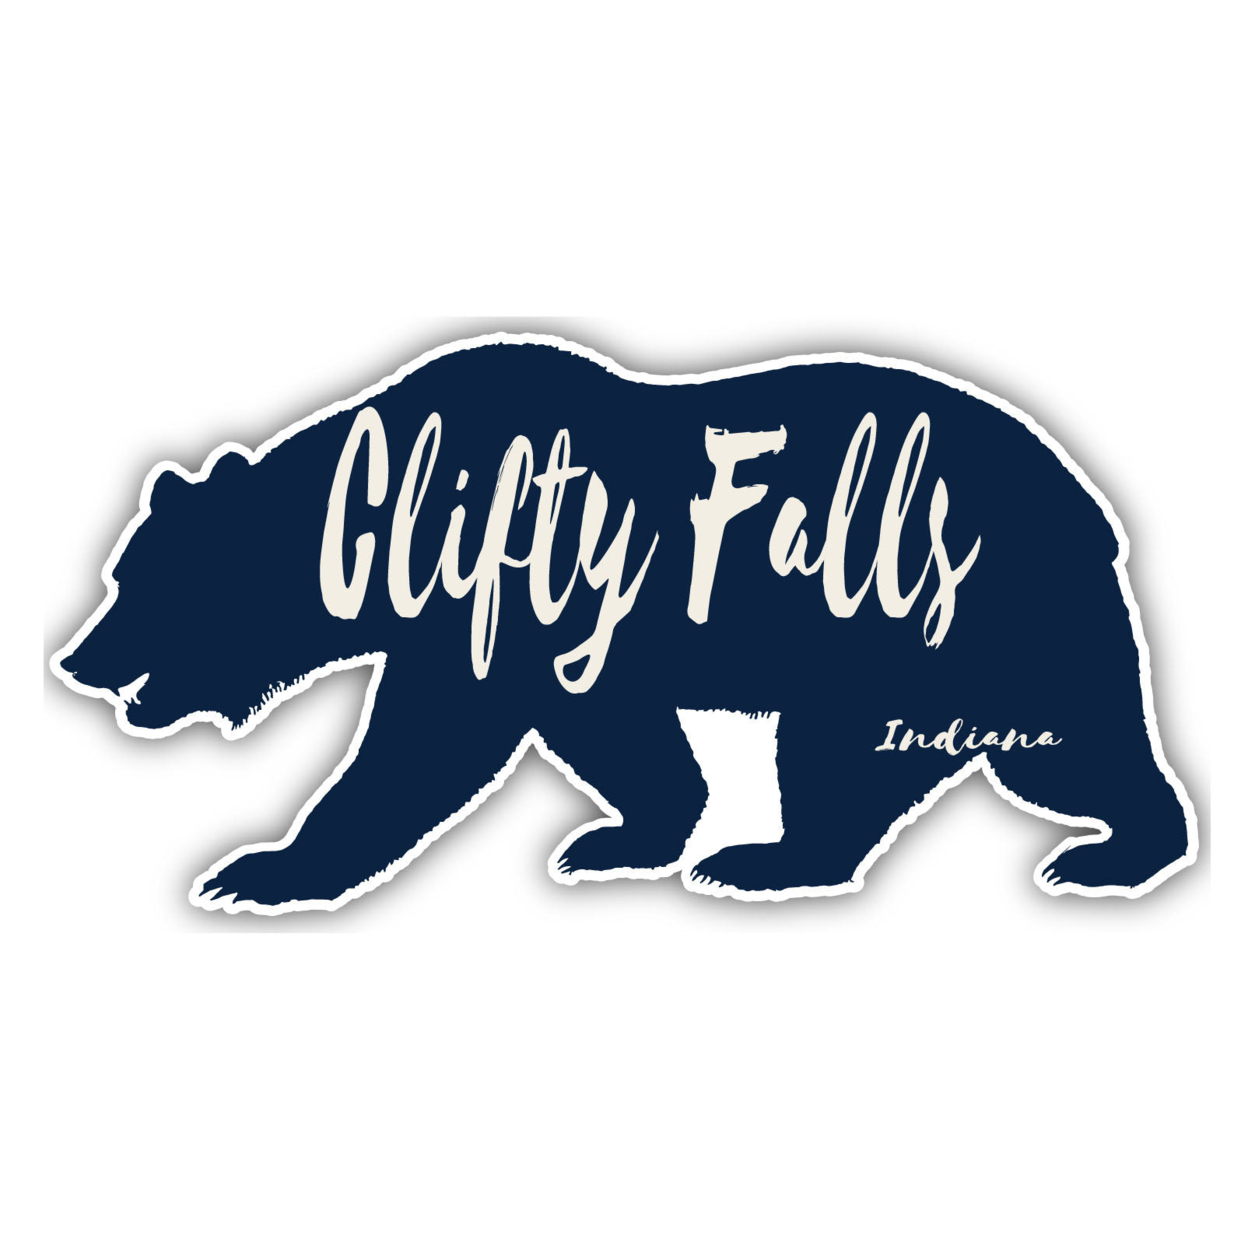 Clifty Falls Indiana Souvenir Decorative Stickers (Choose Theme And Size) - 4-Pack, 2-Inch, Bear